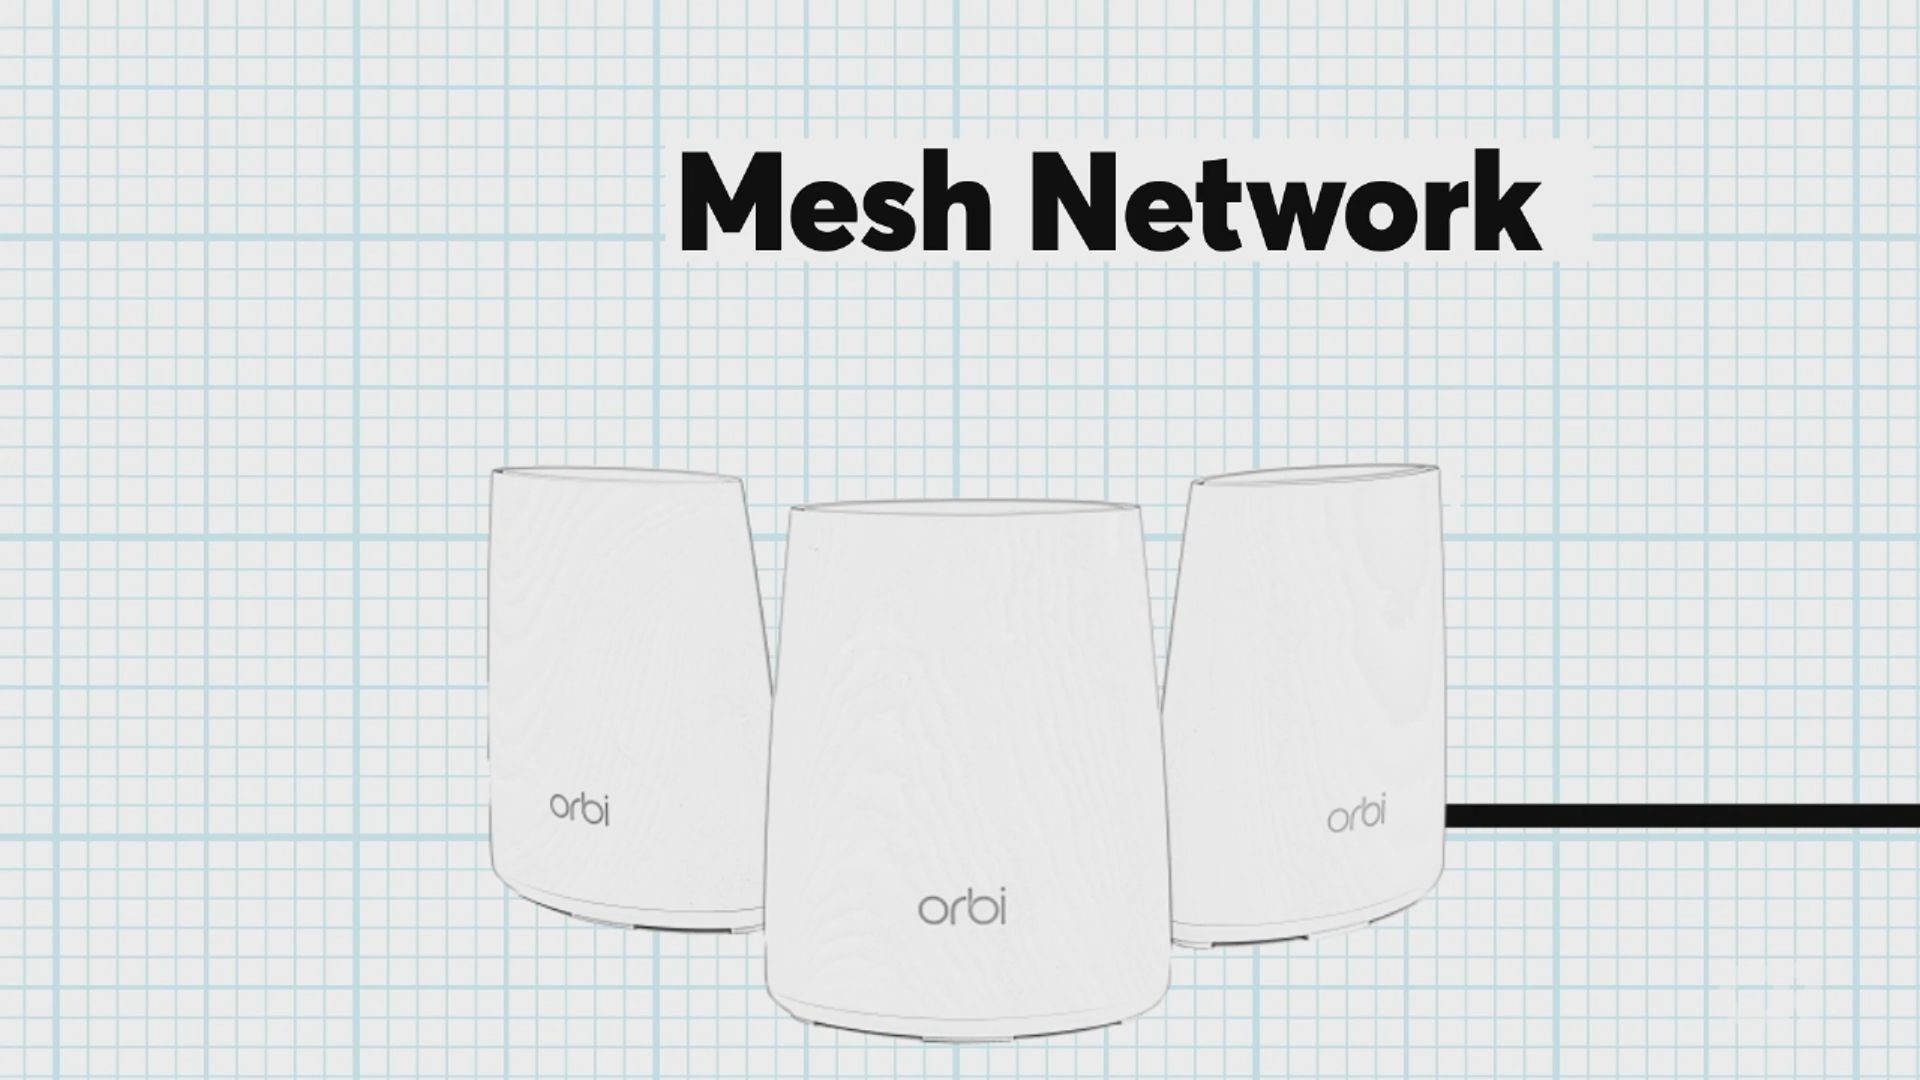 Consumer Reports shows how Mesh Routers help spread the WiFi signal through your house.